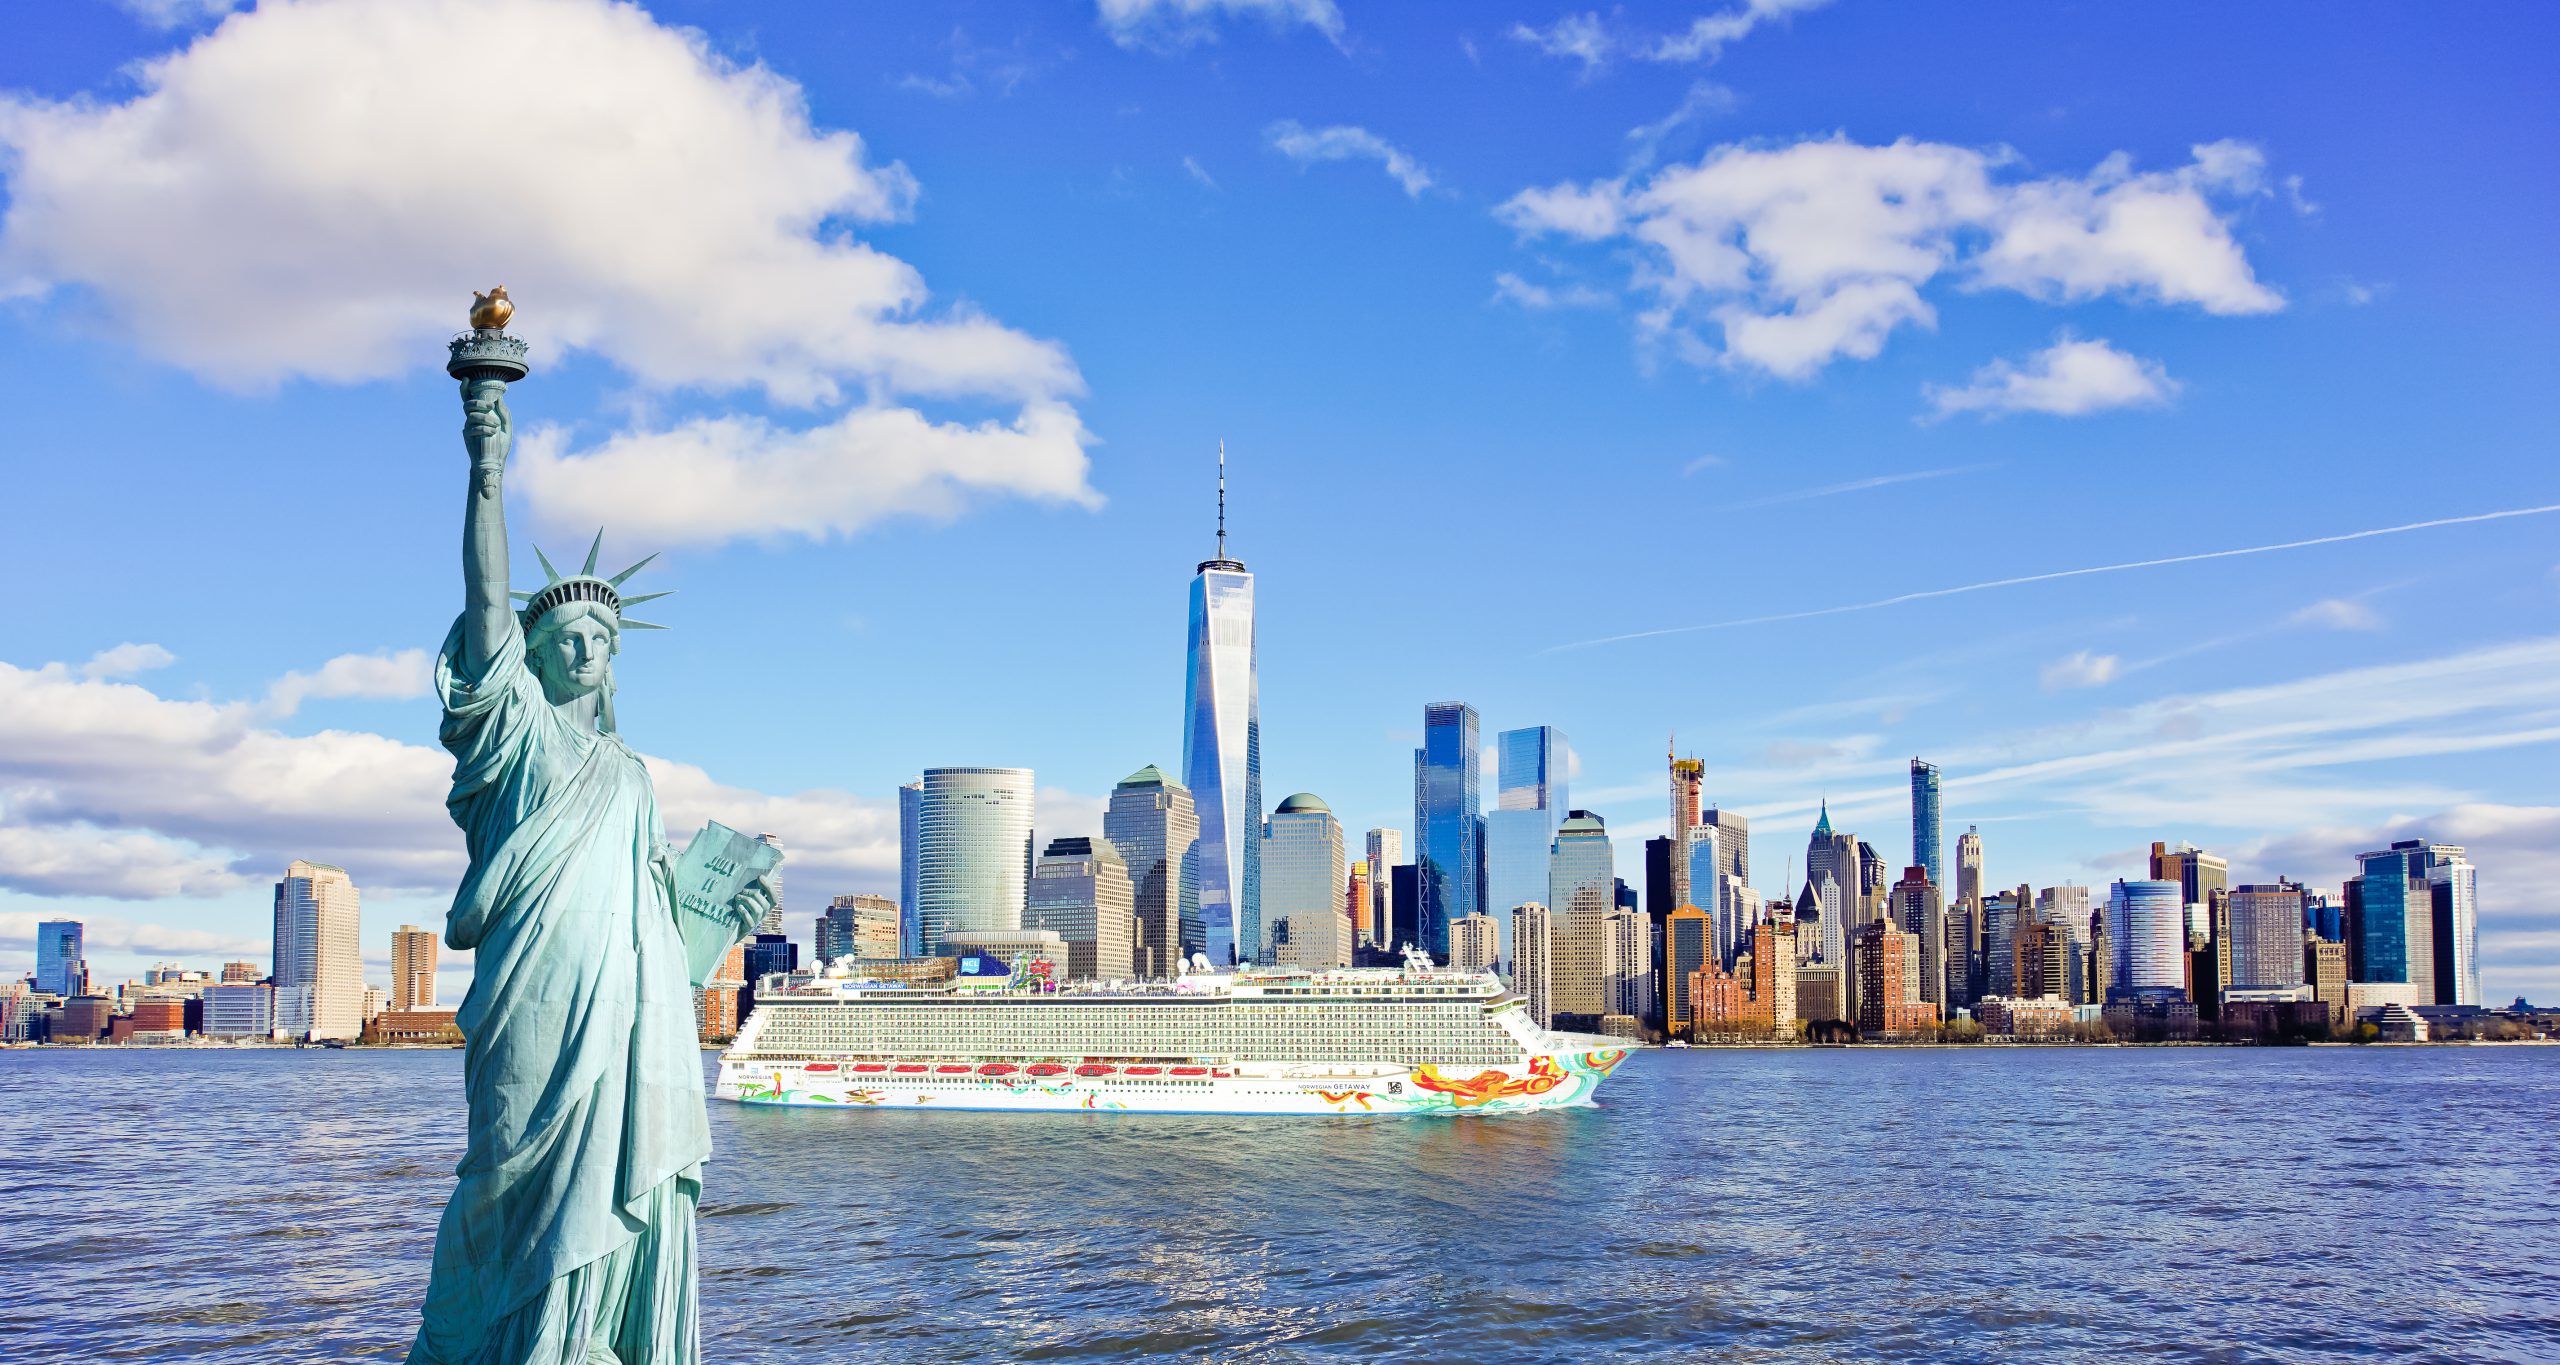 Experience a transatlantic voyage from Rome to New York for as little as $275 per person per night